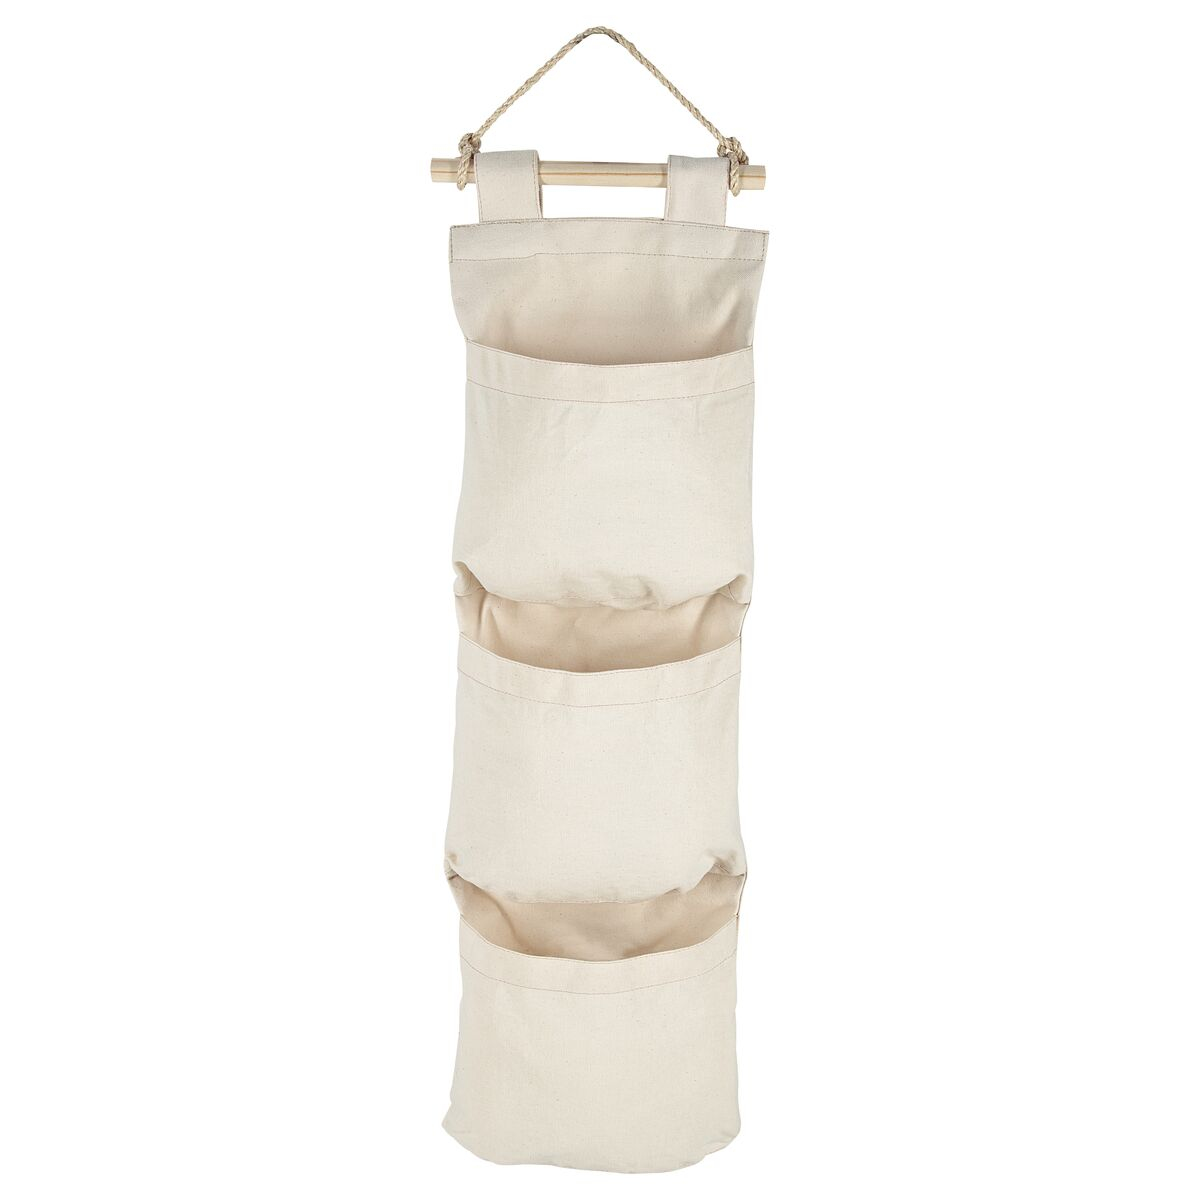 
Tramontina Organizer in Natural Canvas with 3 Pockets and Rope for Hanging
